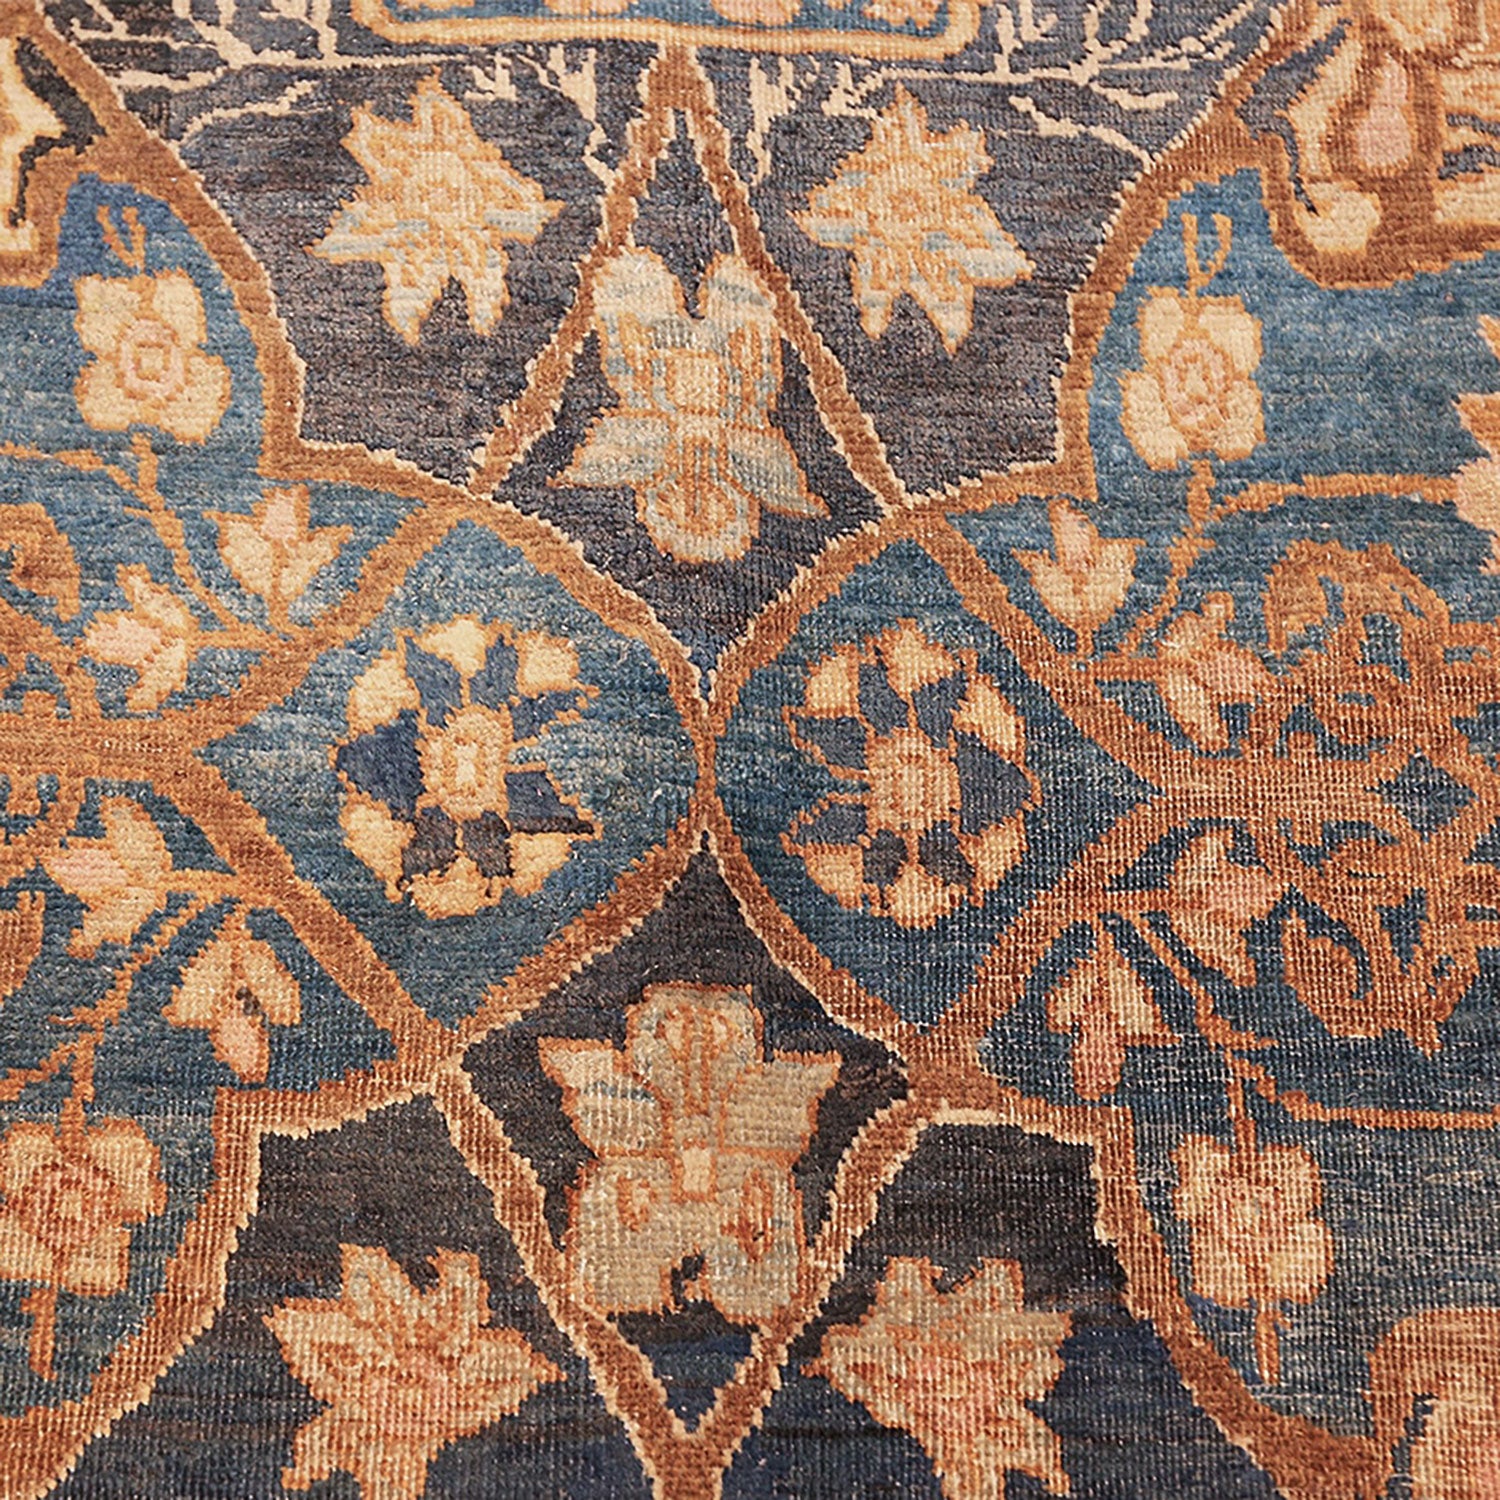 Close-up of a vintage floral rug with intricate botanical motifs.